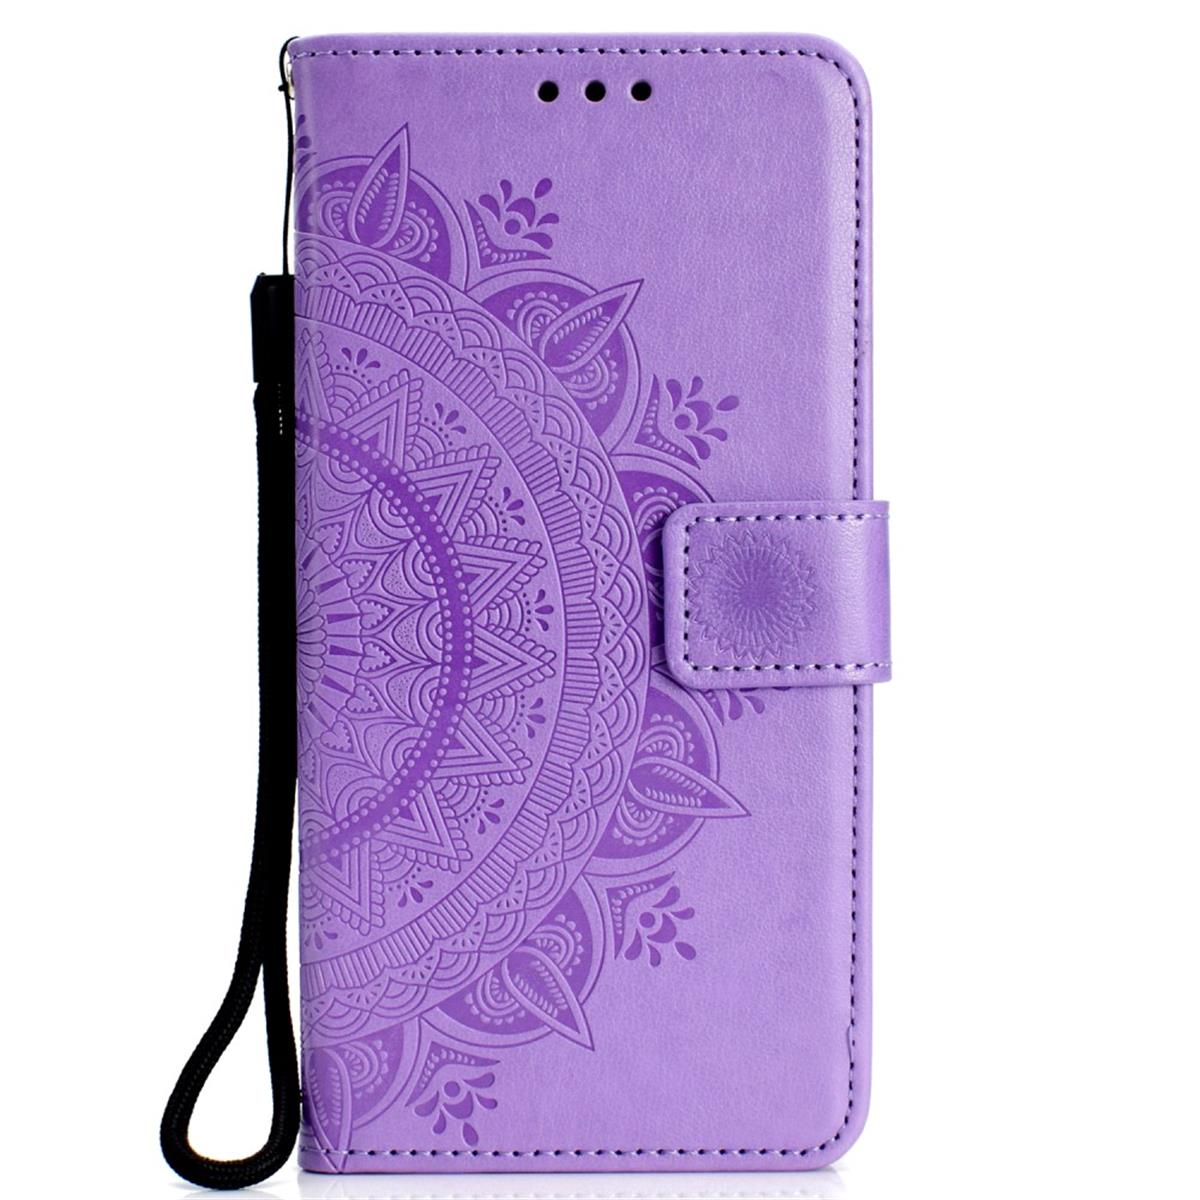 Klapphülle COVERKINGZ Lila Galaxy mit S10, Mandala Bookcover, Muster, Samsung,